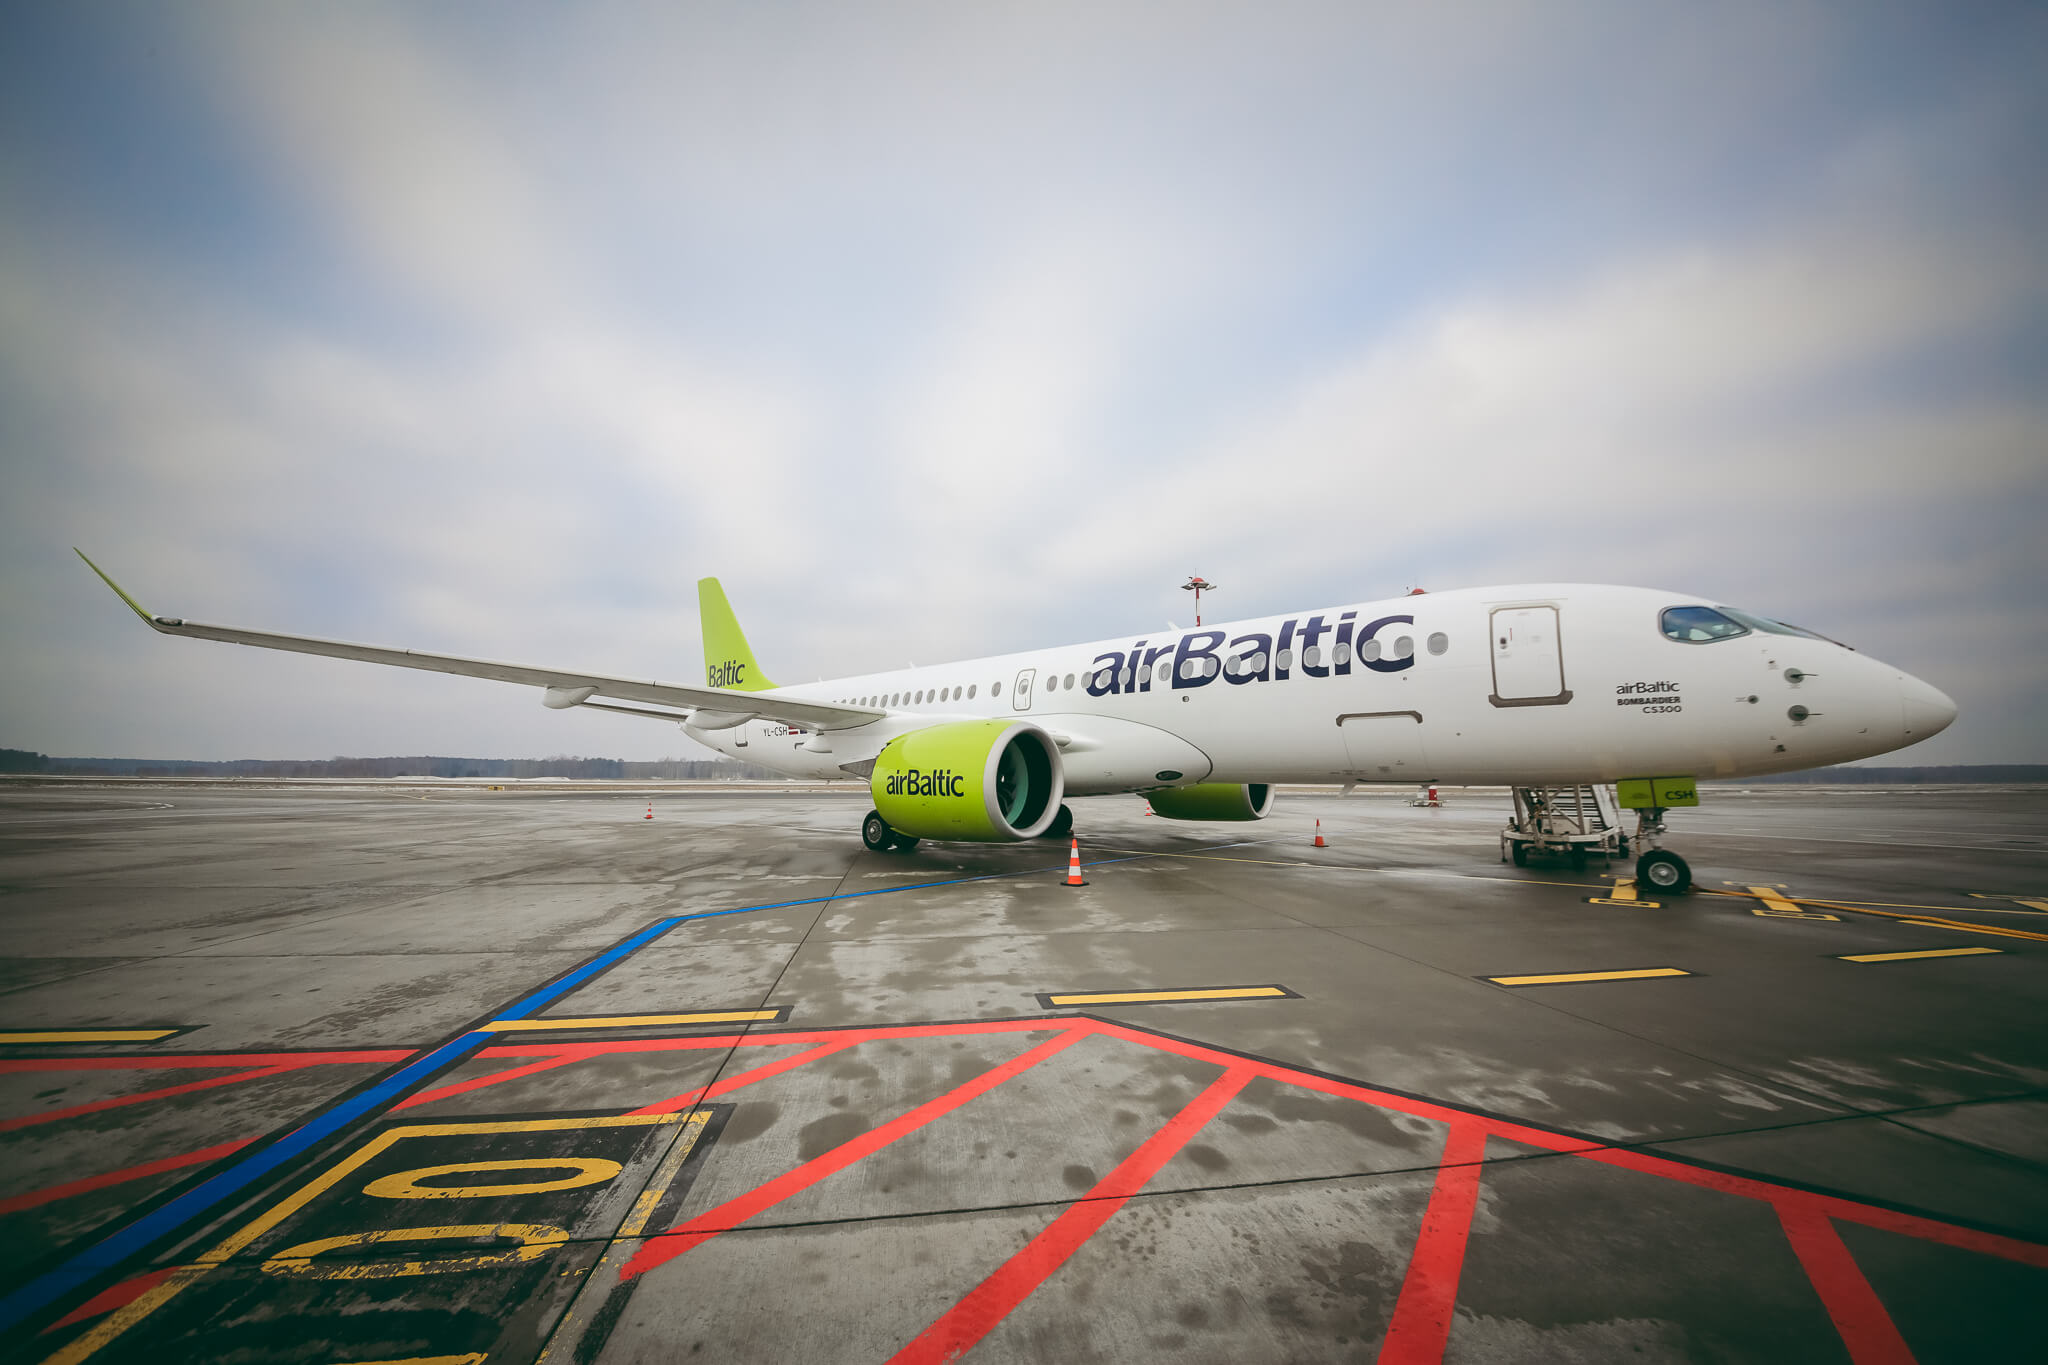 Skytech-AIC appointed as finance arranger for the sale and leaseback of six new airBaltic Bombardier CS300 aircraft